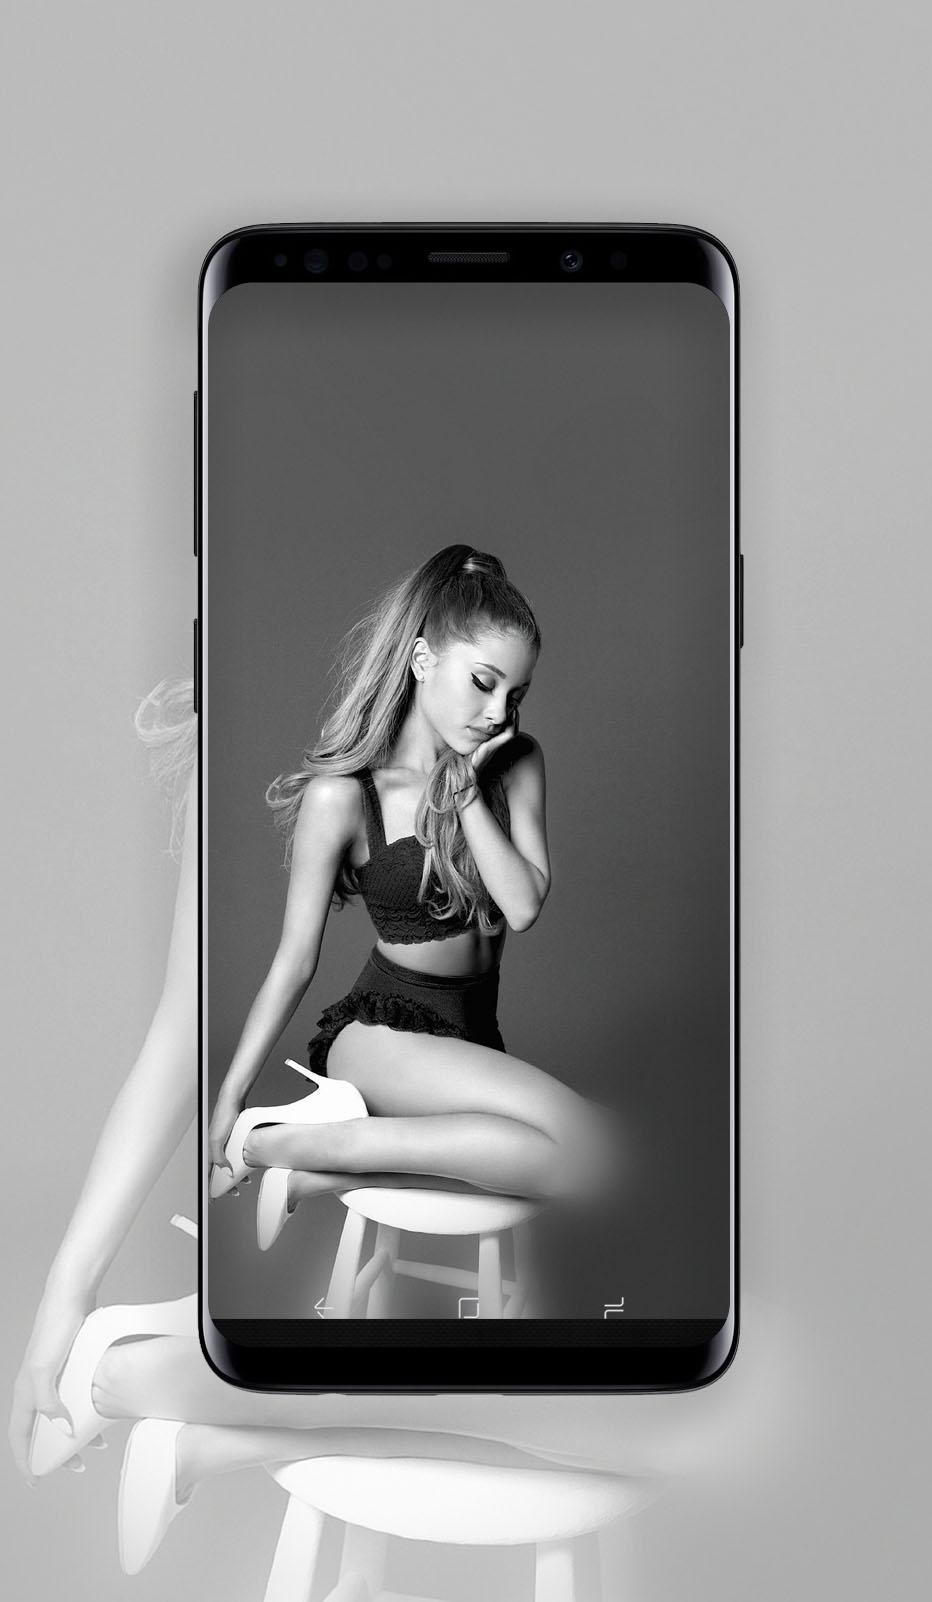 Ariana Grande Wallpaper Hd 4k For Android Apk Download